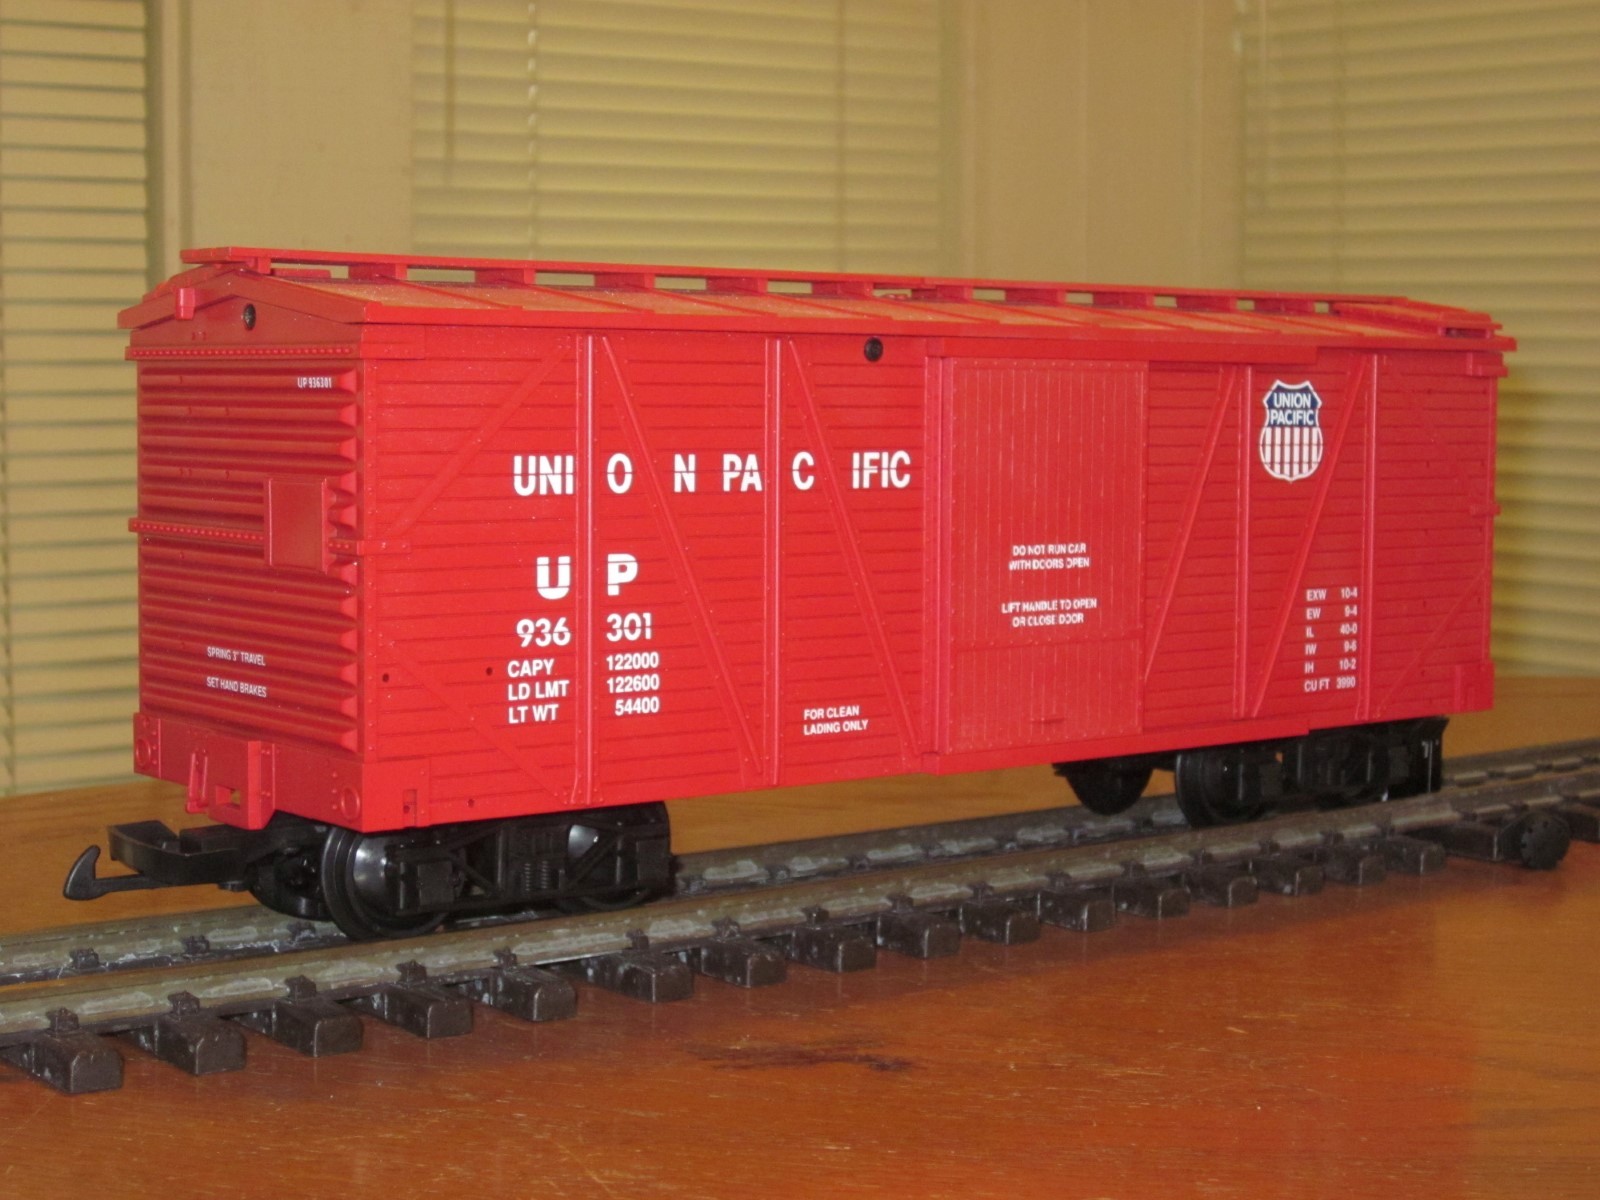 R1405 Union Pacific UP 936301